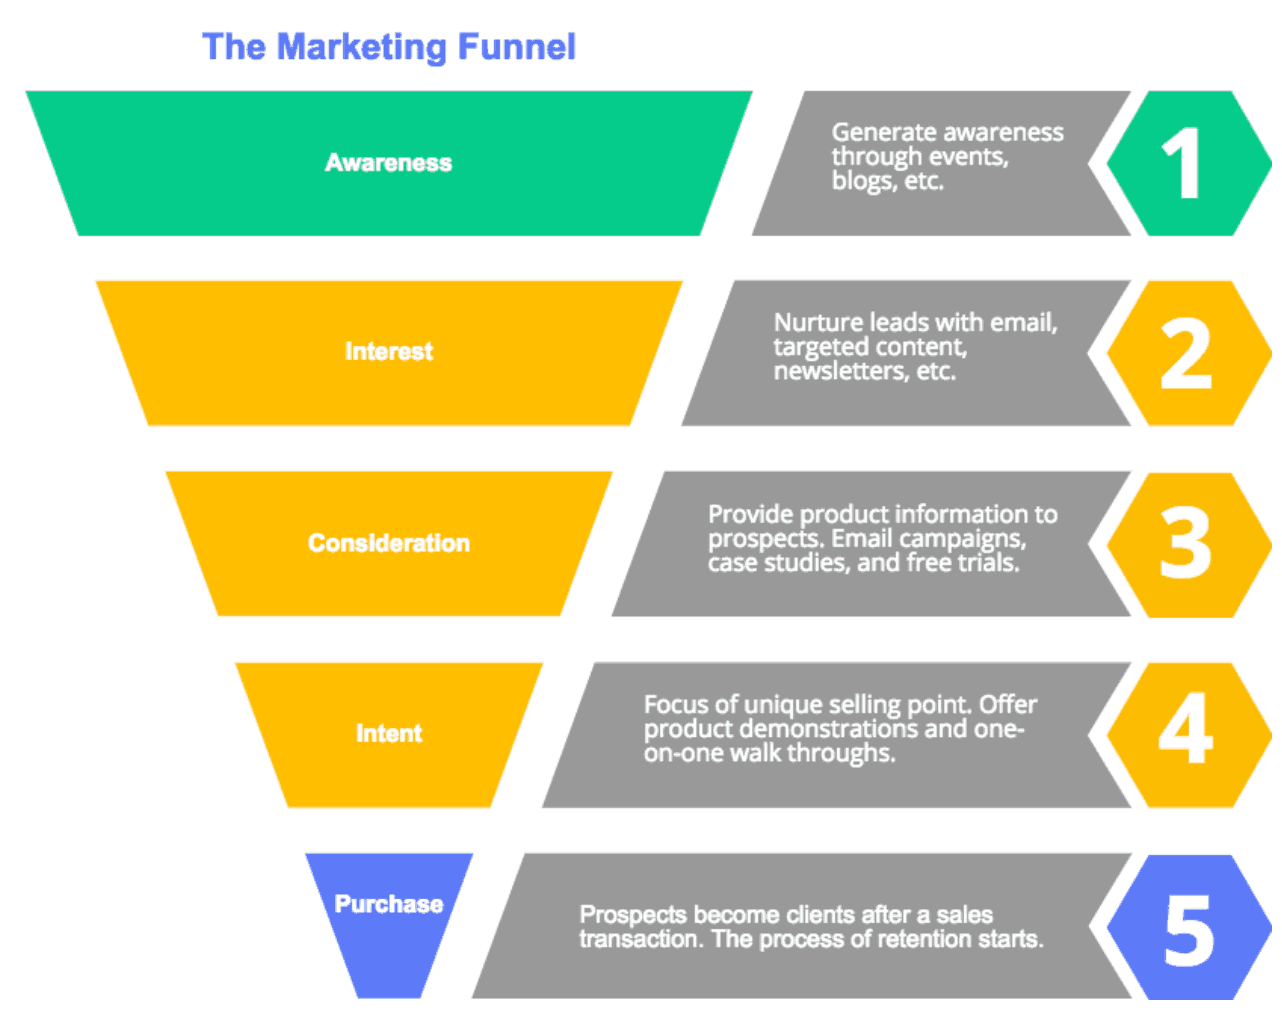 Image showing the marketing funnel and how content marketing tactics must take place at each stage.